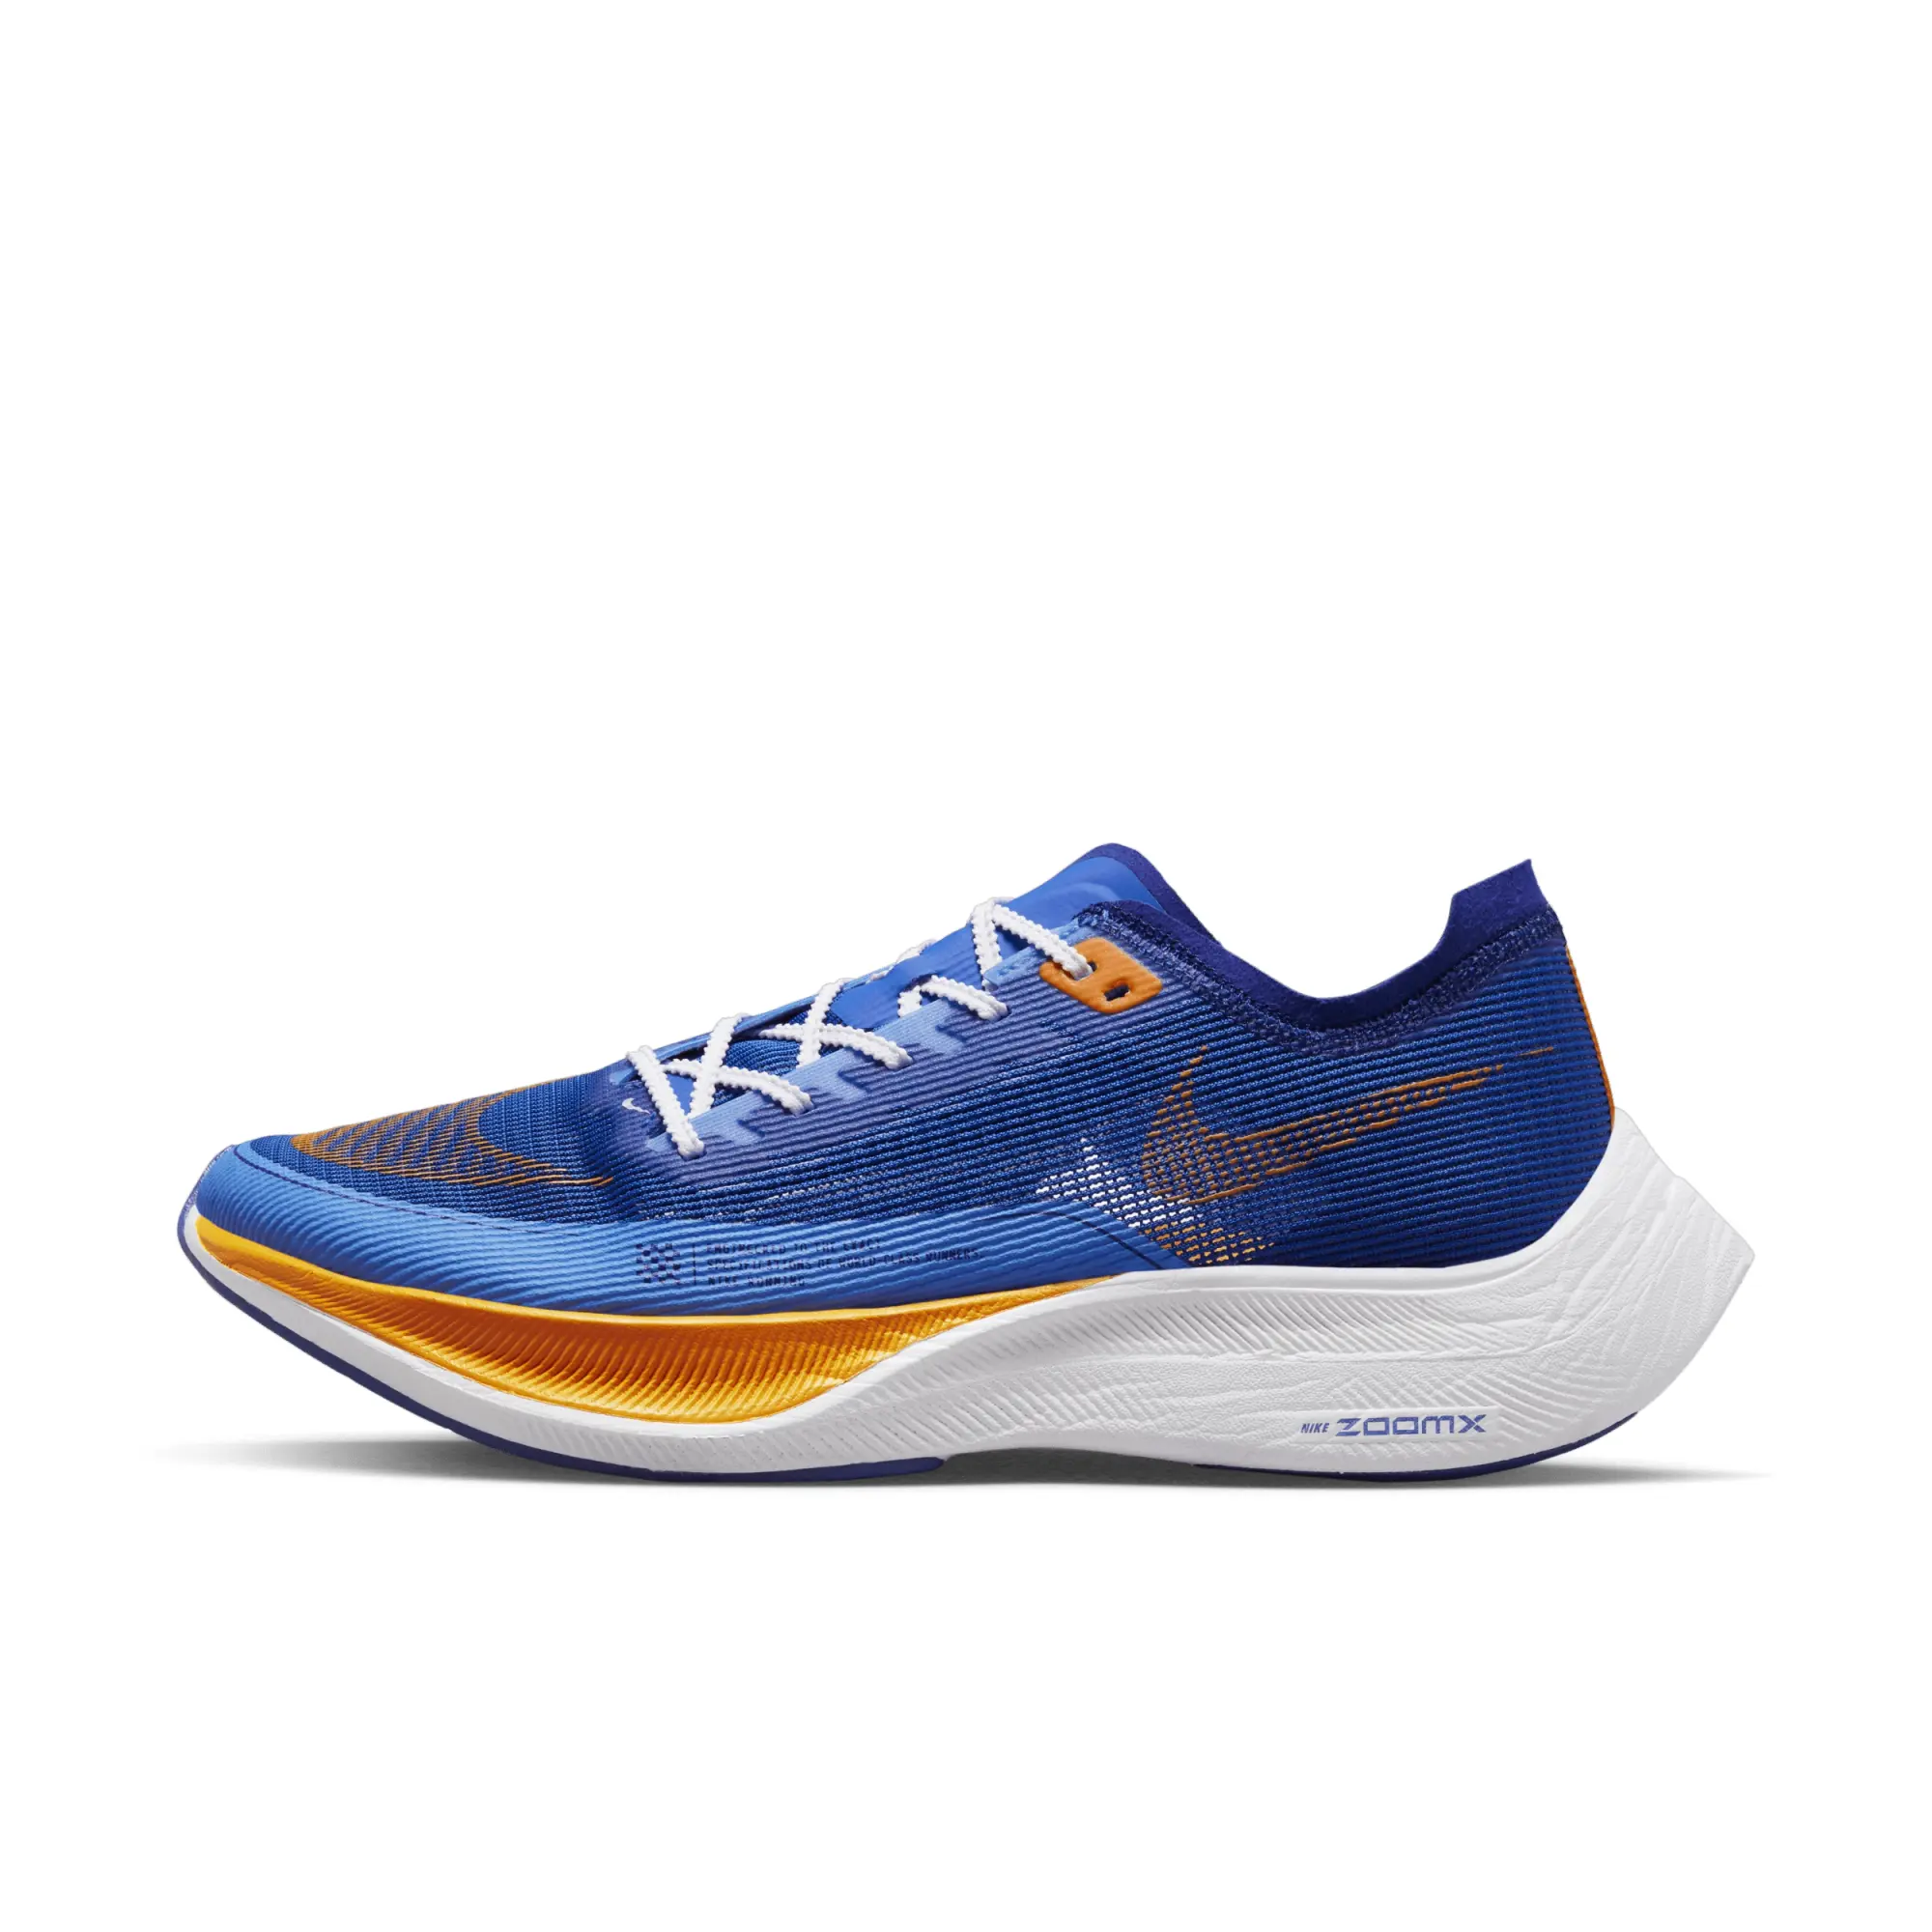 Nike ZoomX Vaporfly Next% 2 Game Royal Shoes